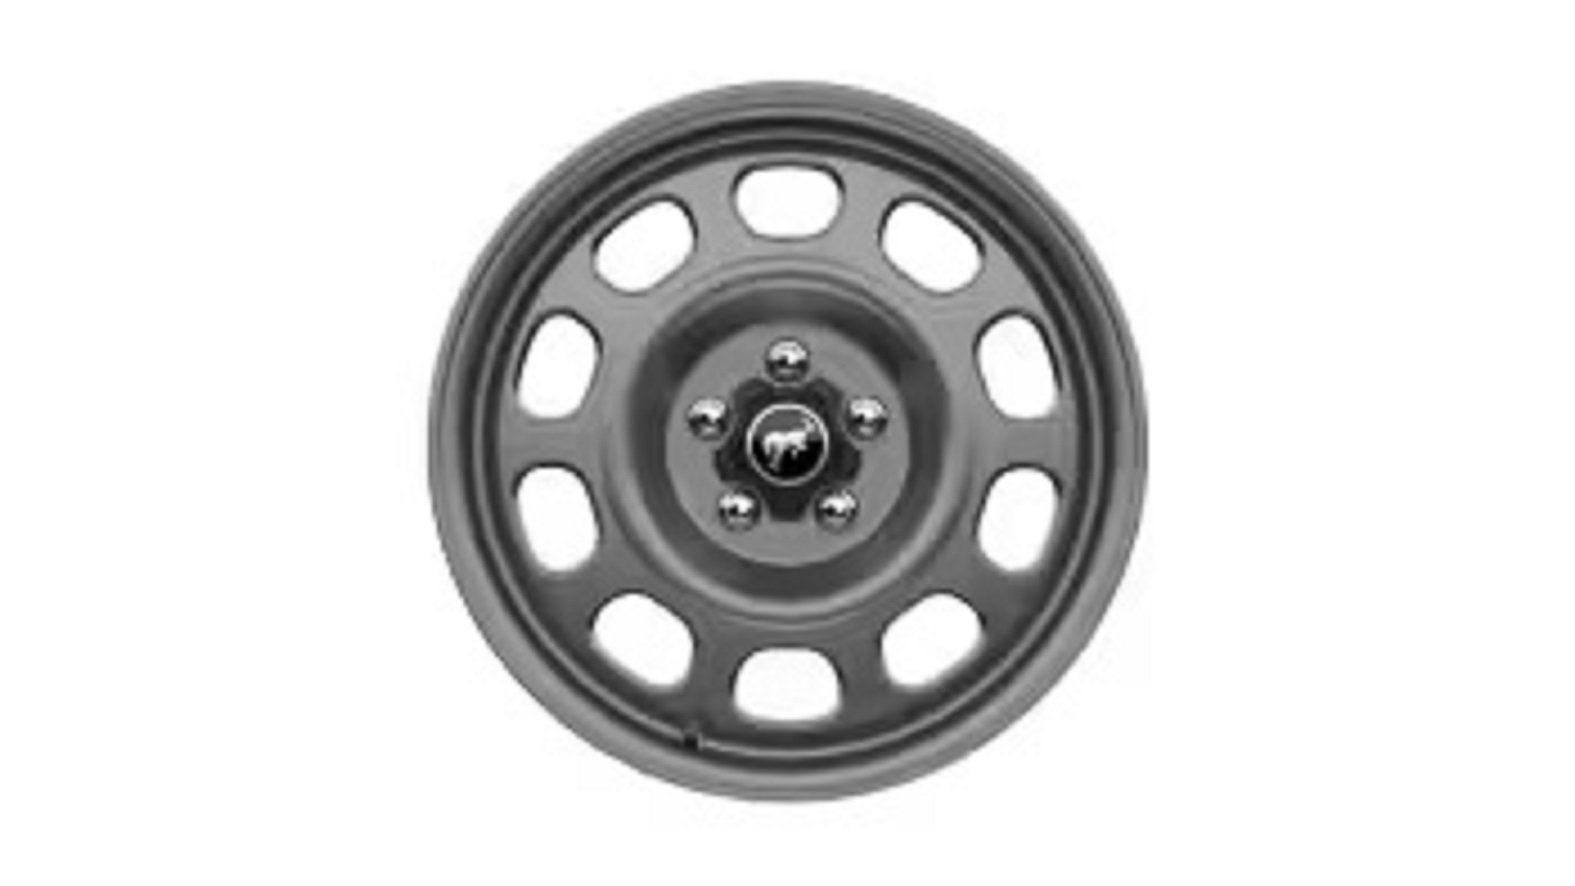 17" Carbonized Gray-painted Low Gloss Aluminum Wheel